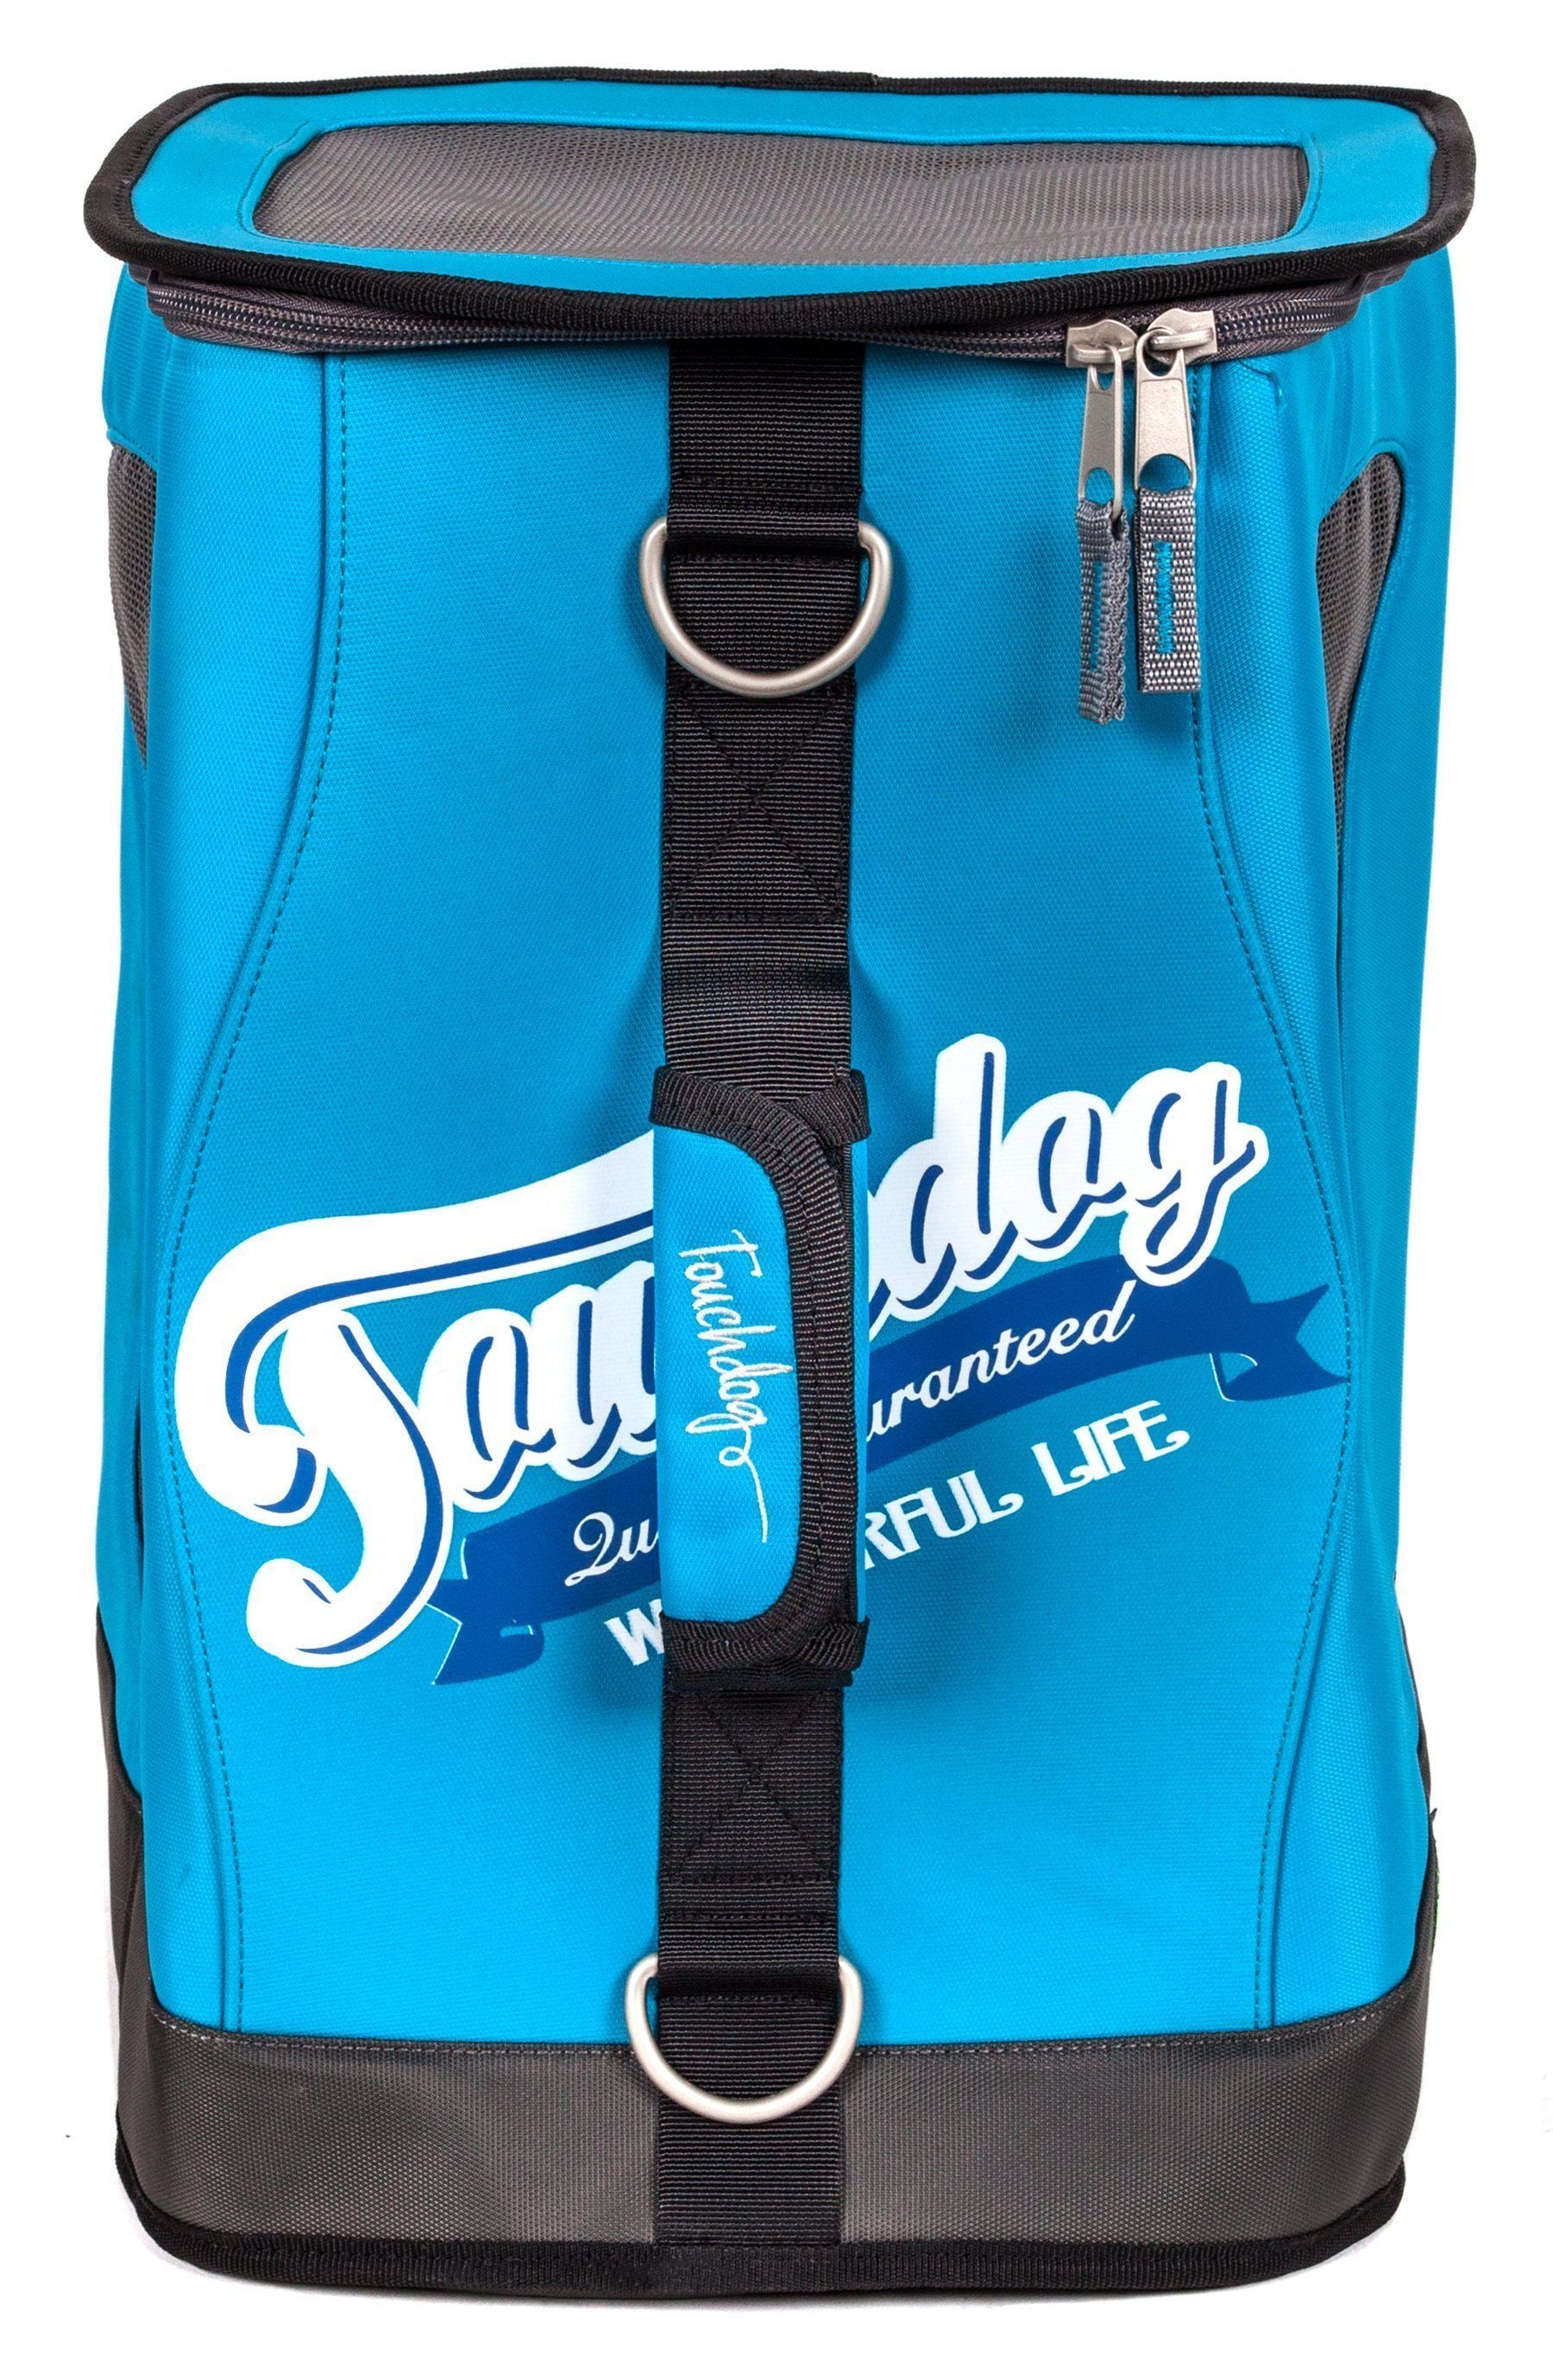 Touchdog ® 'Ultimate-Travel' 3-in-1 Airline Approved Backpack Dog Carrier  